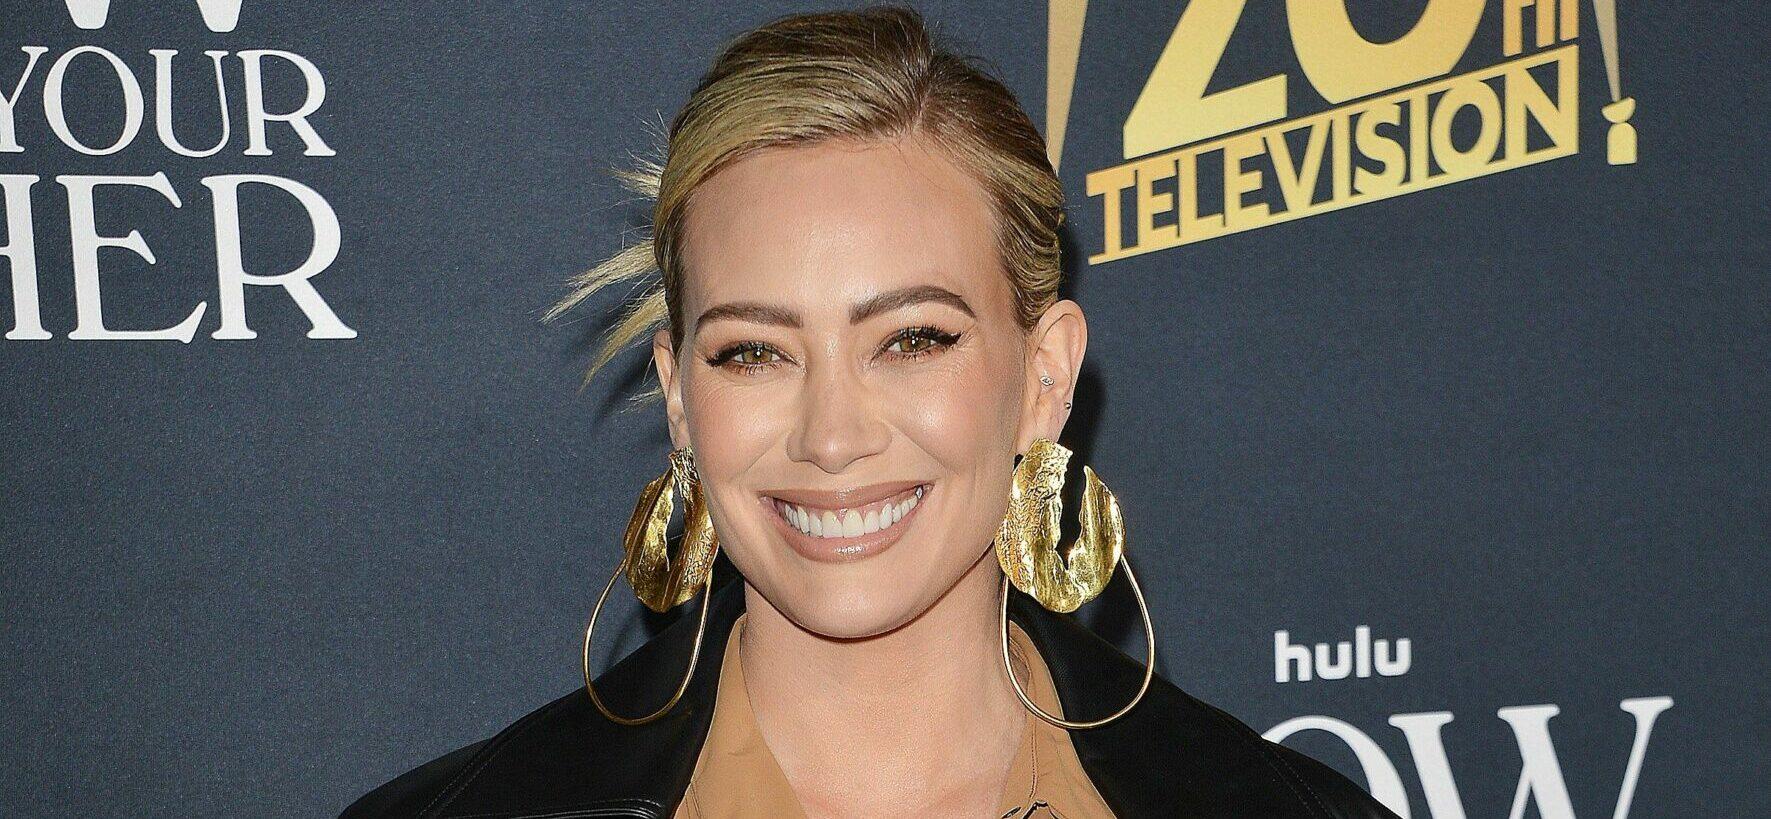 Hilary Duff at the 'How I Met Your Father' TV Show photocall Los Angeles